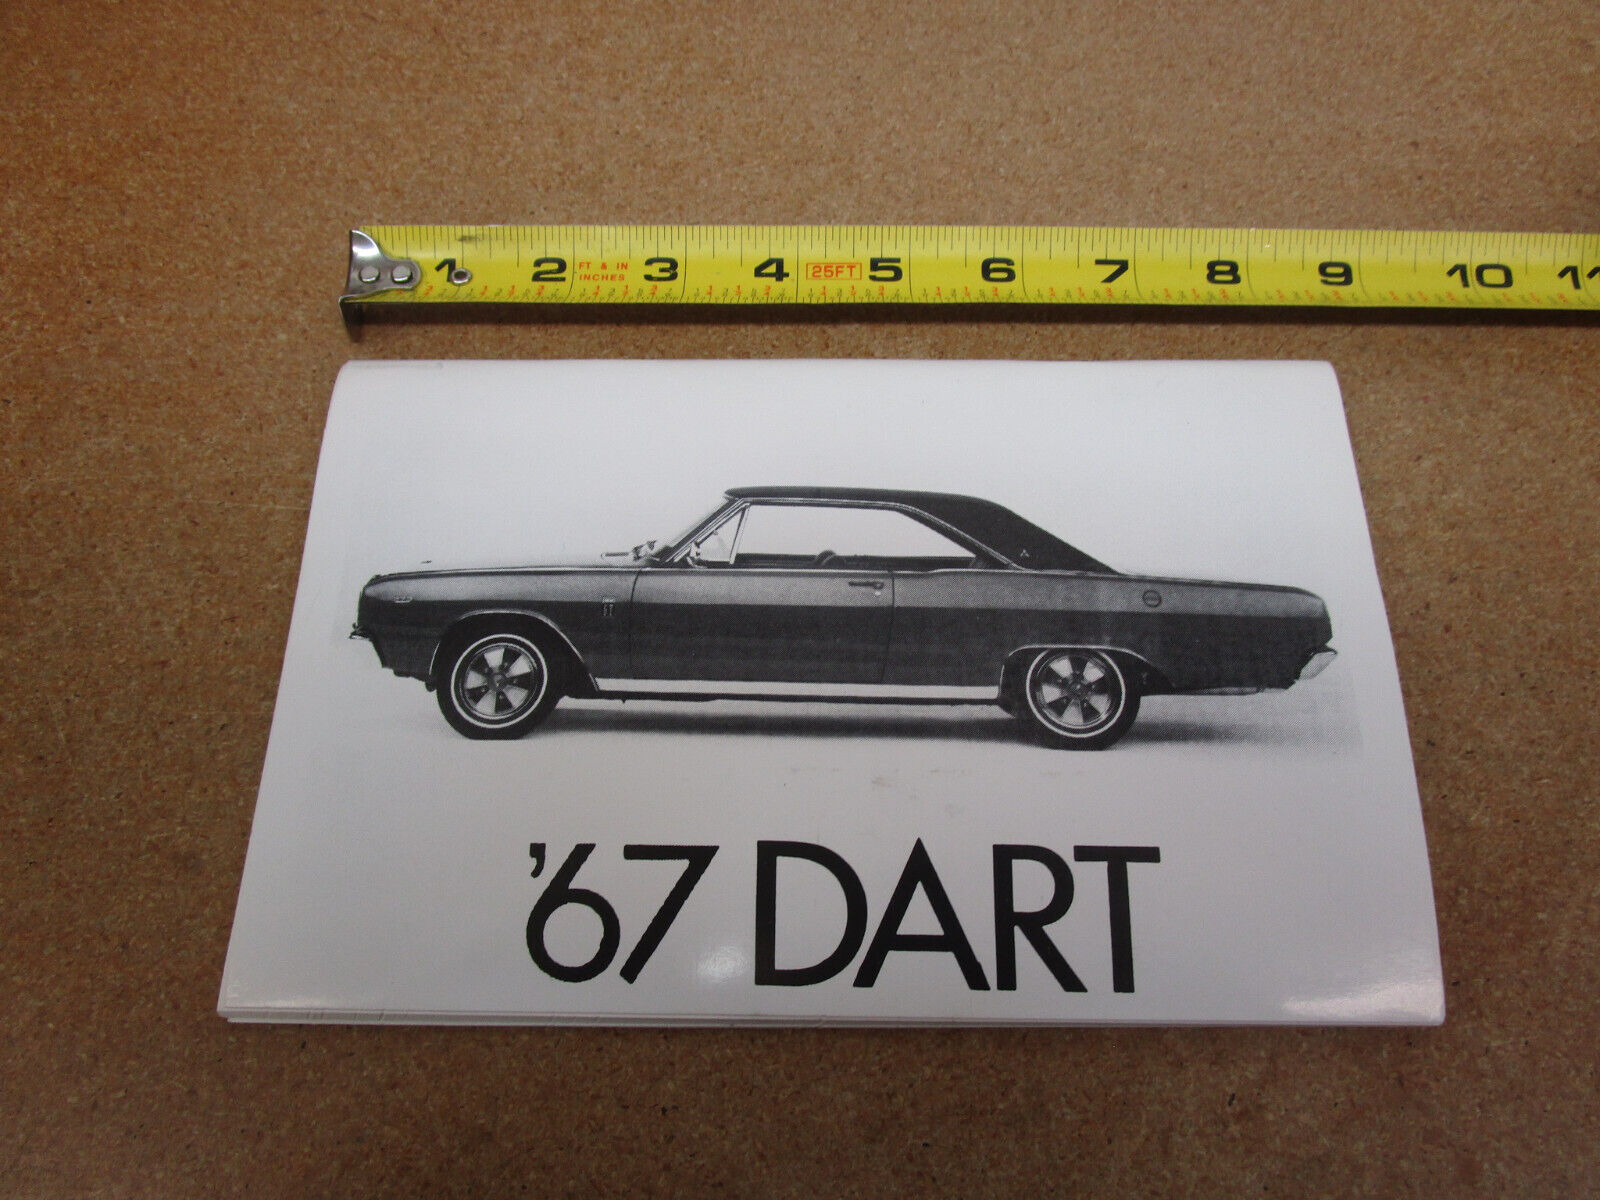 1966 Dodge Dart Illustrated Facts & Features manual book brochure